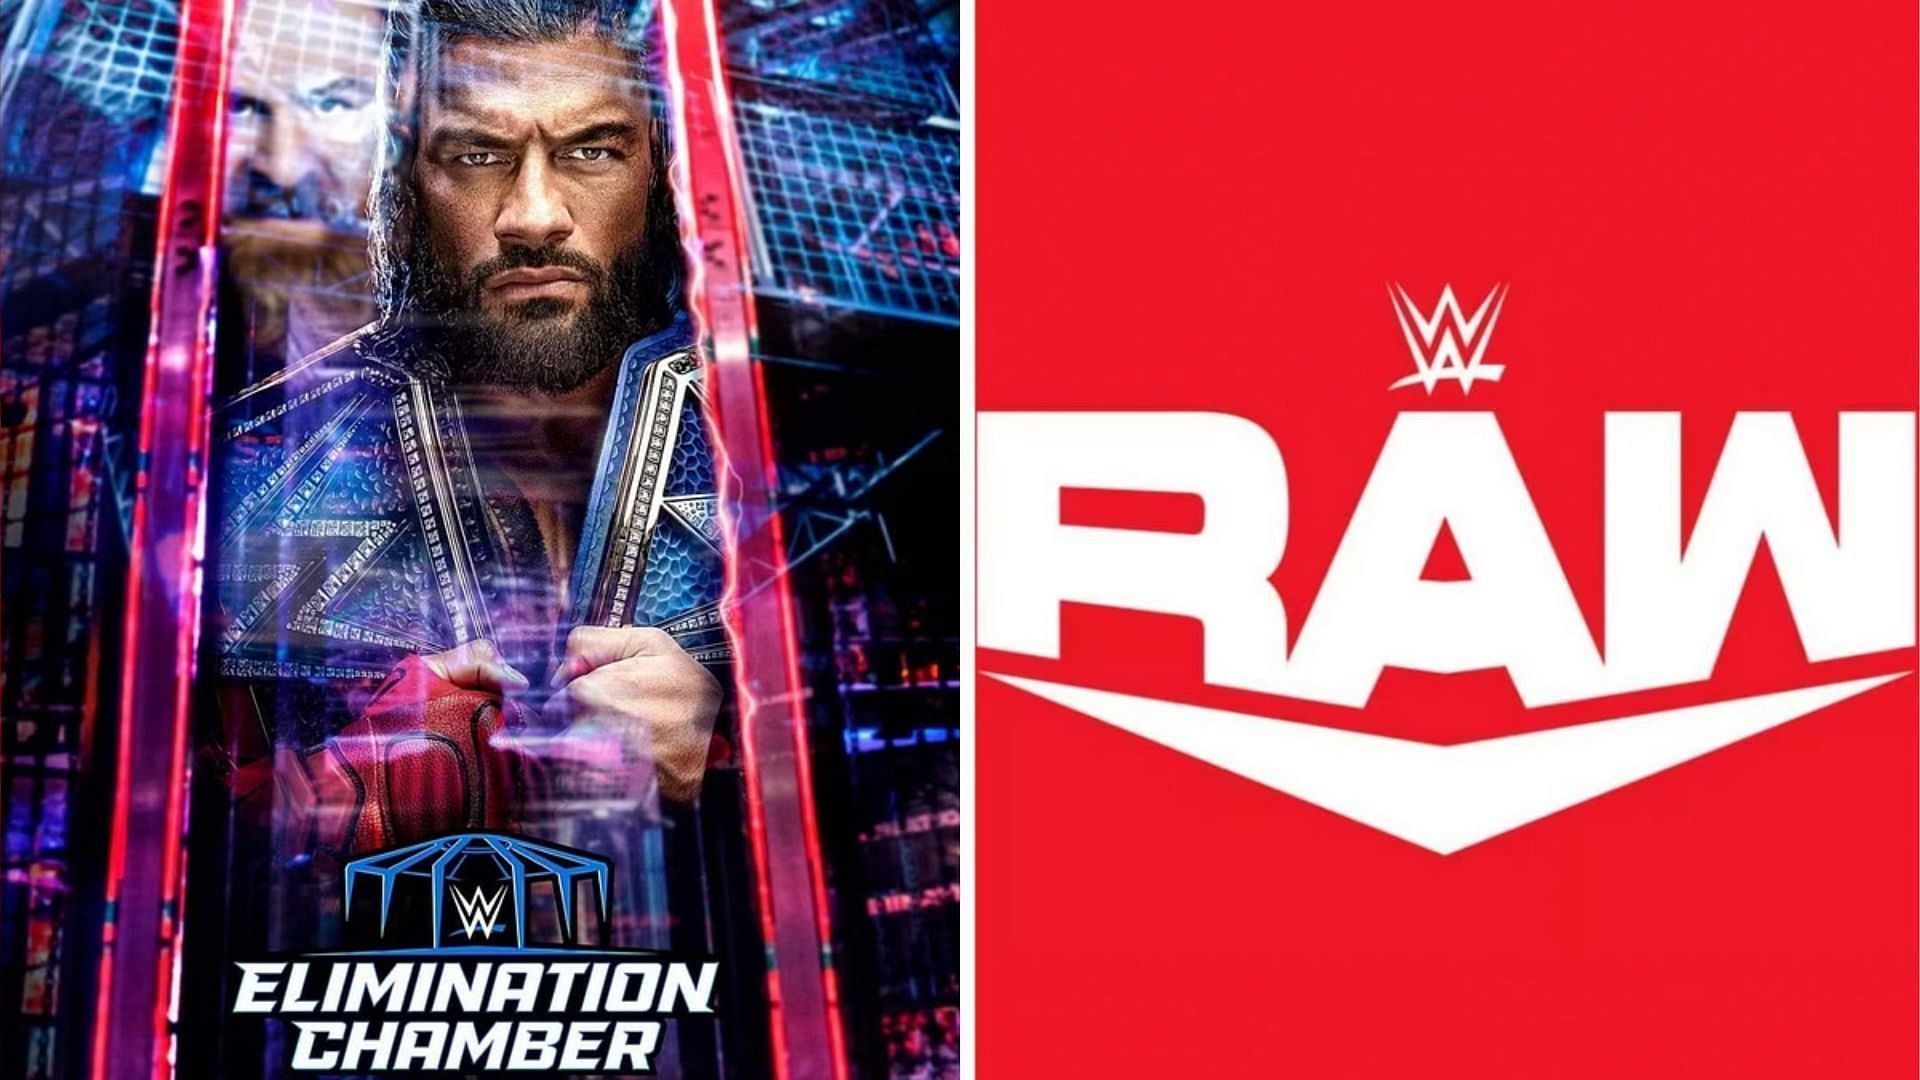 Elimination Chamber 2023 already has a stacked up card